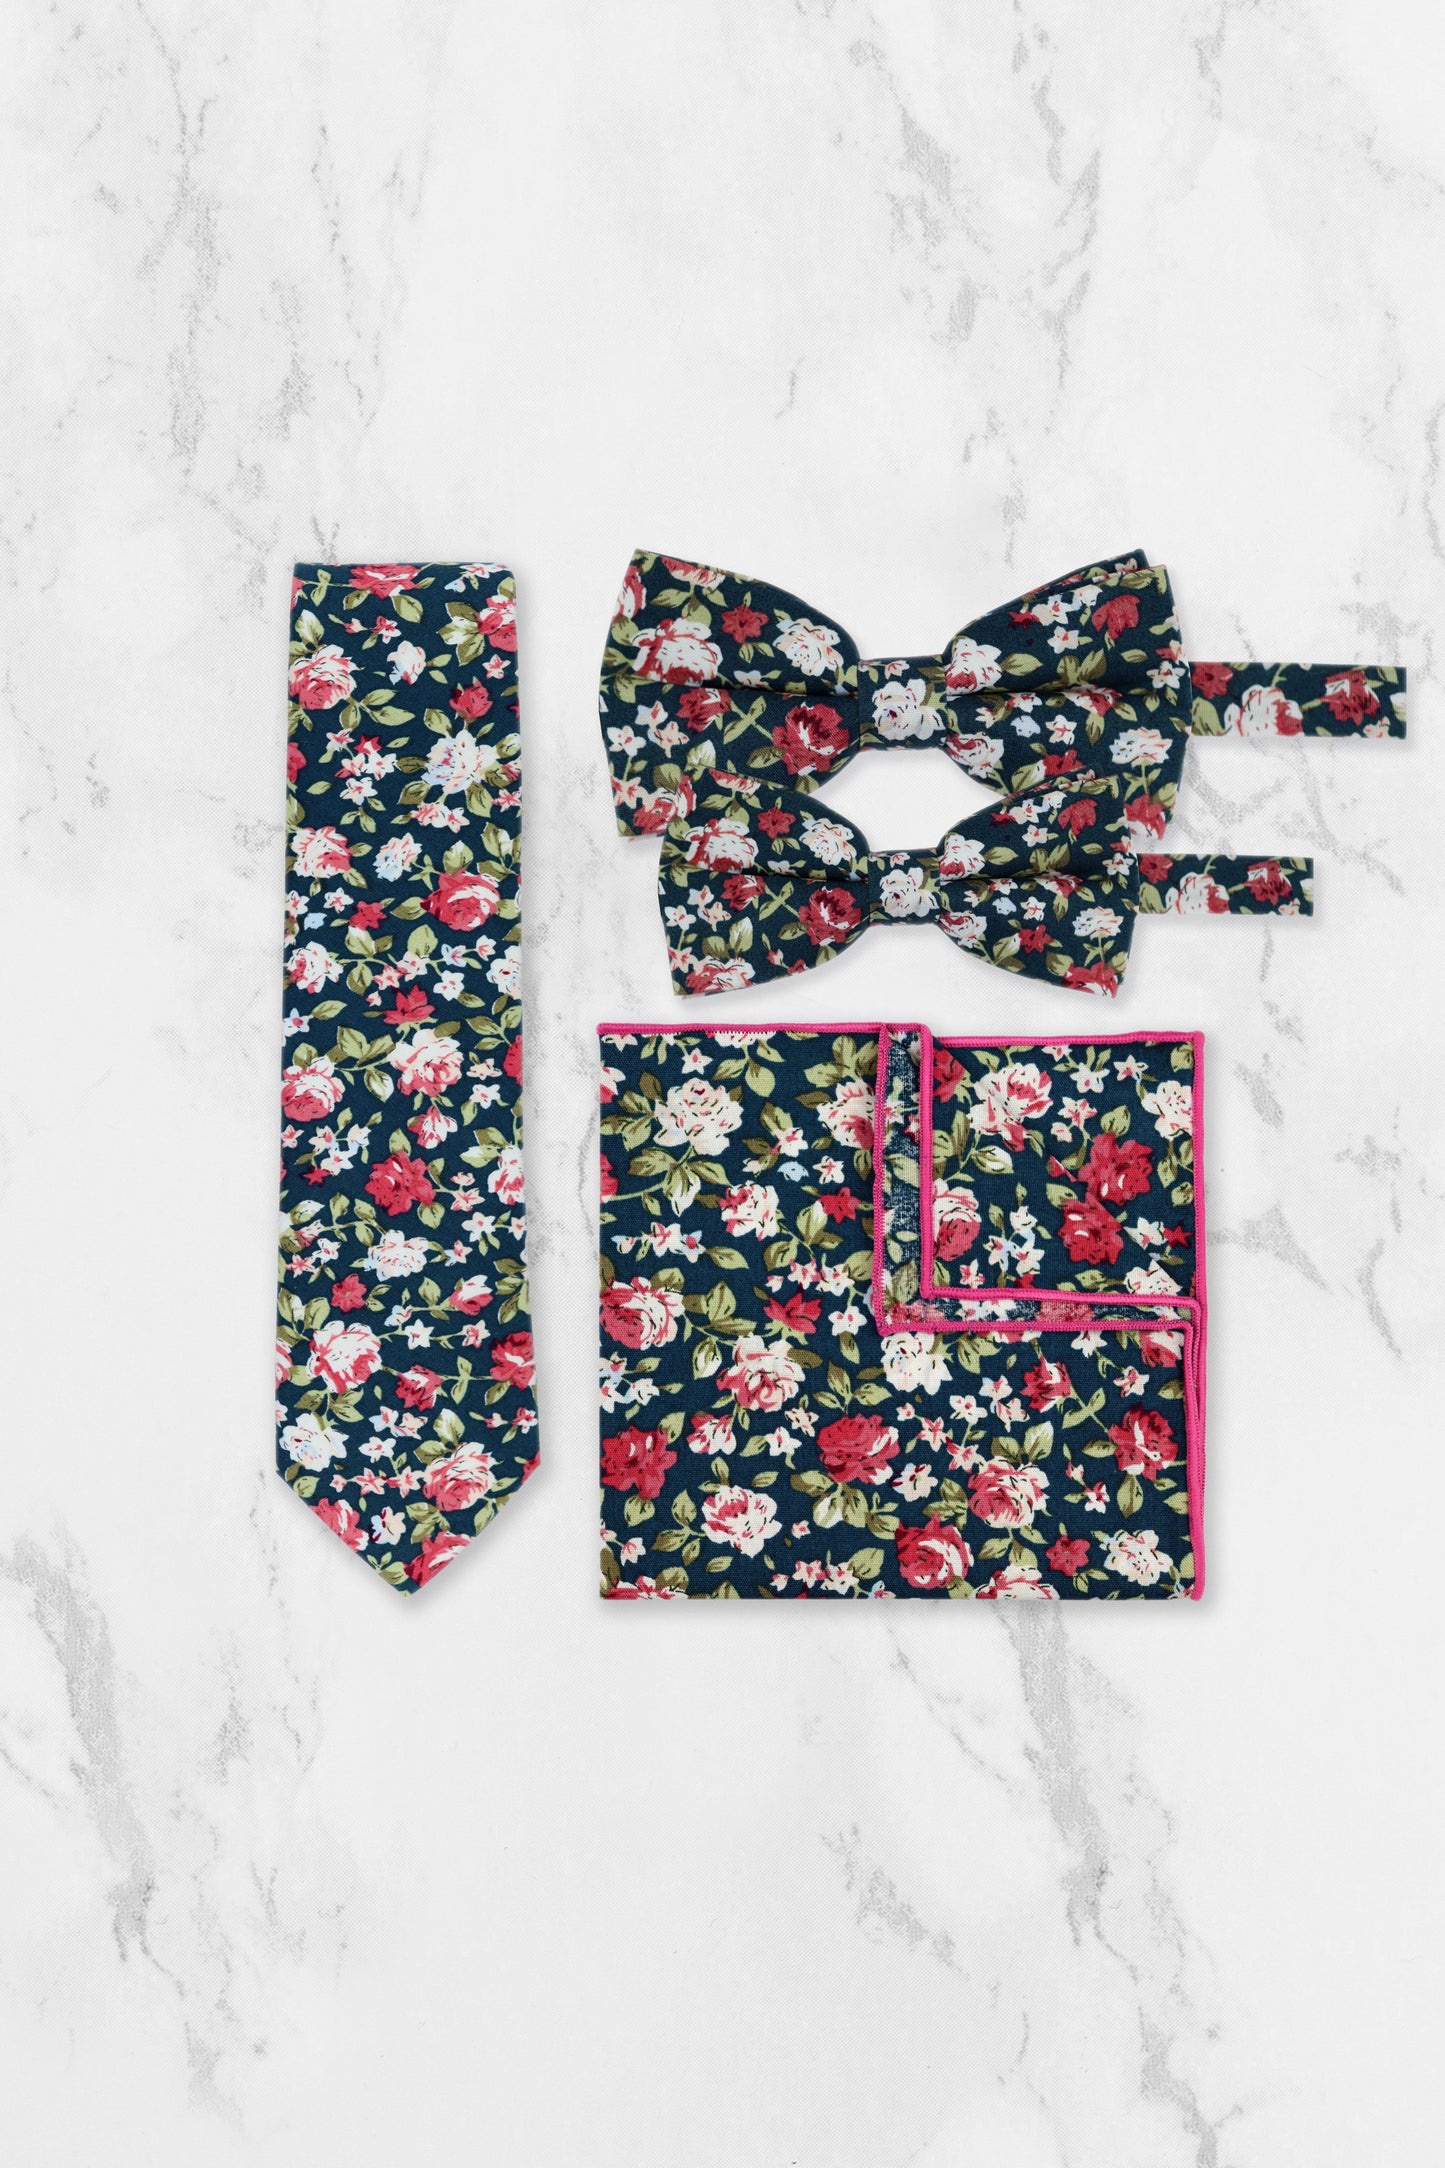 100% Cotton Floral Print Bow Tie - Green & Pink